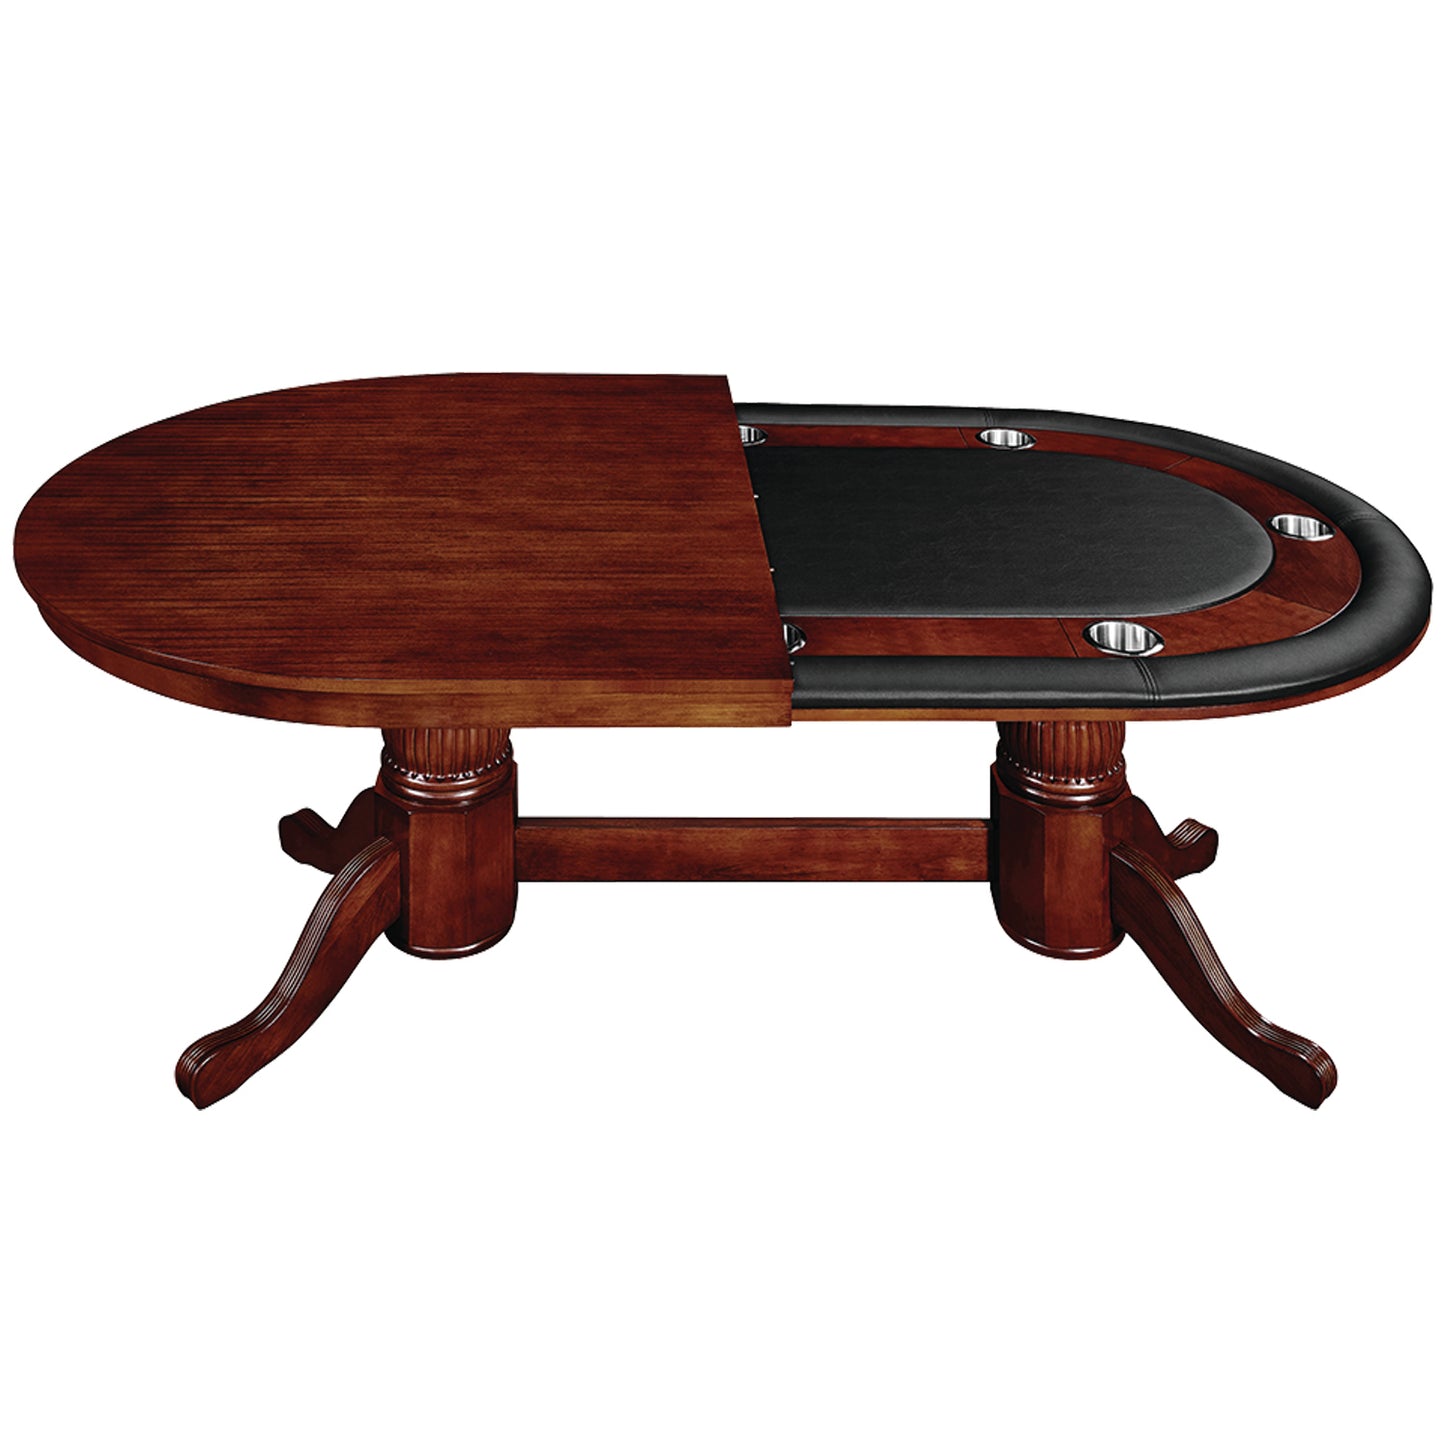 84 inch solid wood poker table with half the wooden dining top in an English tudor finish.